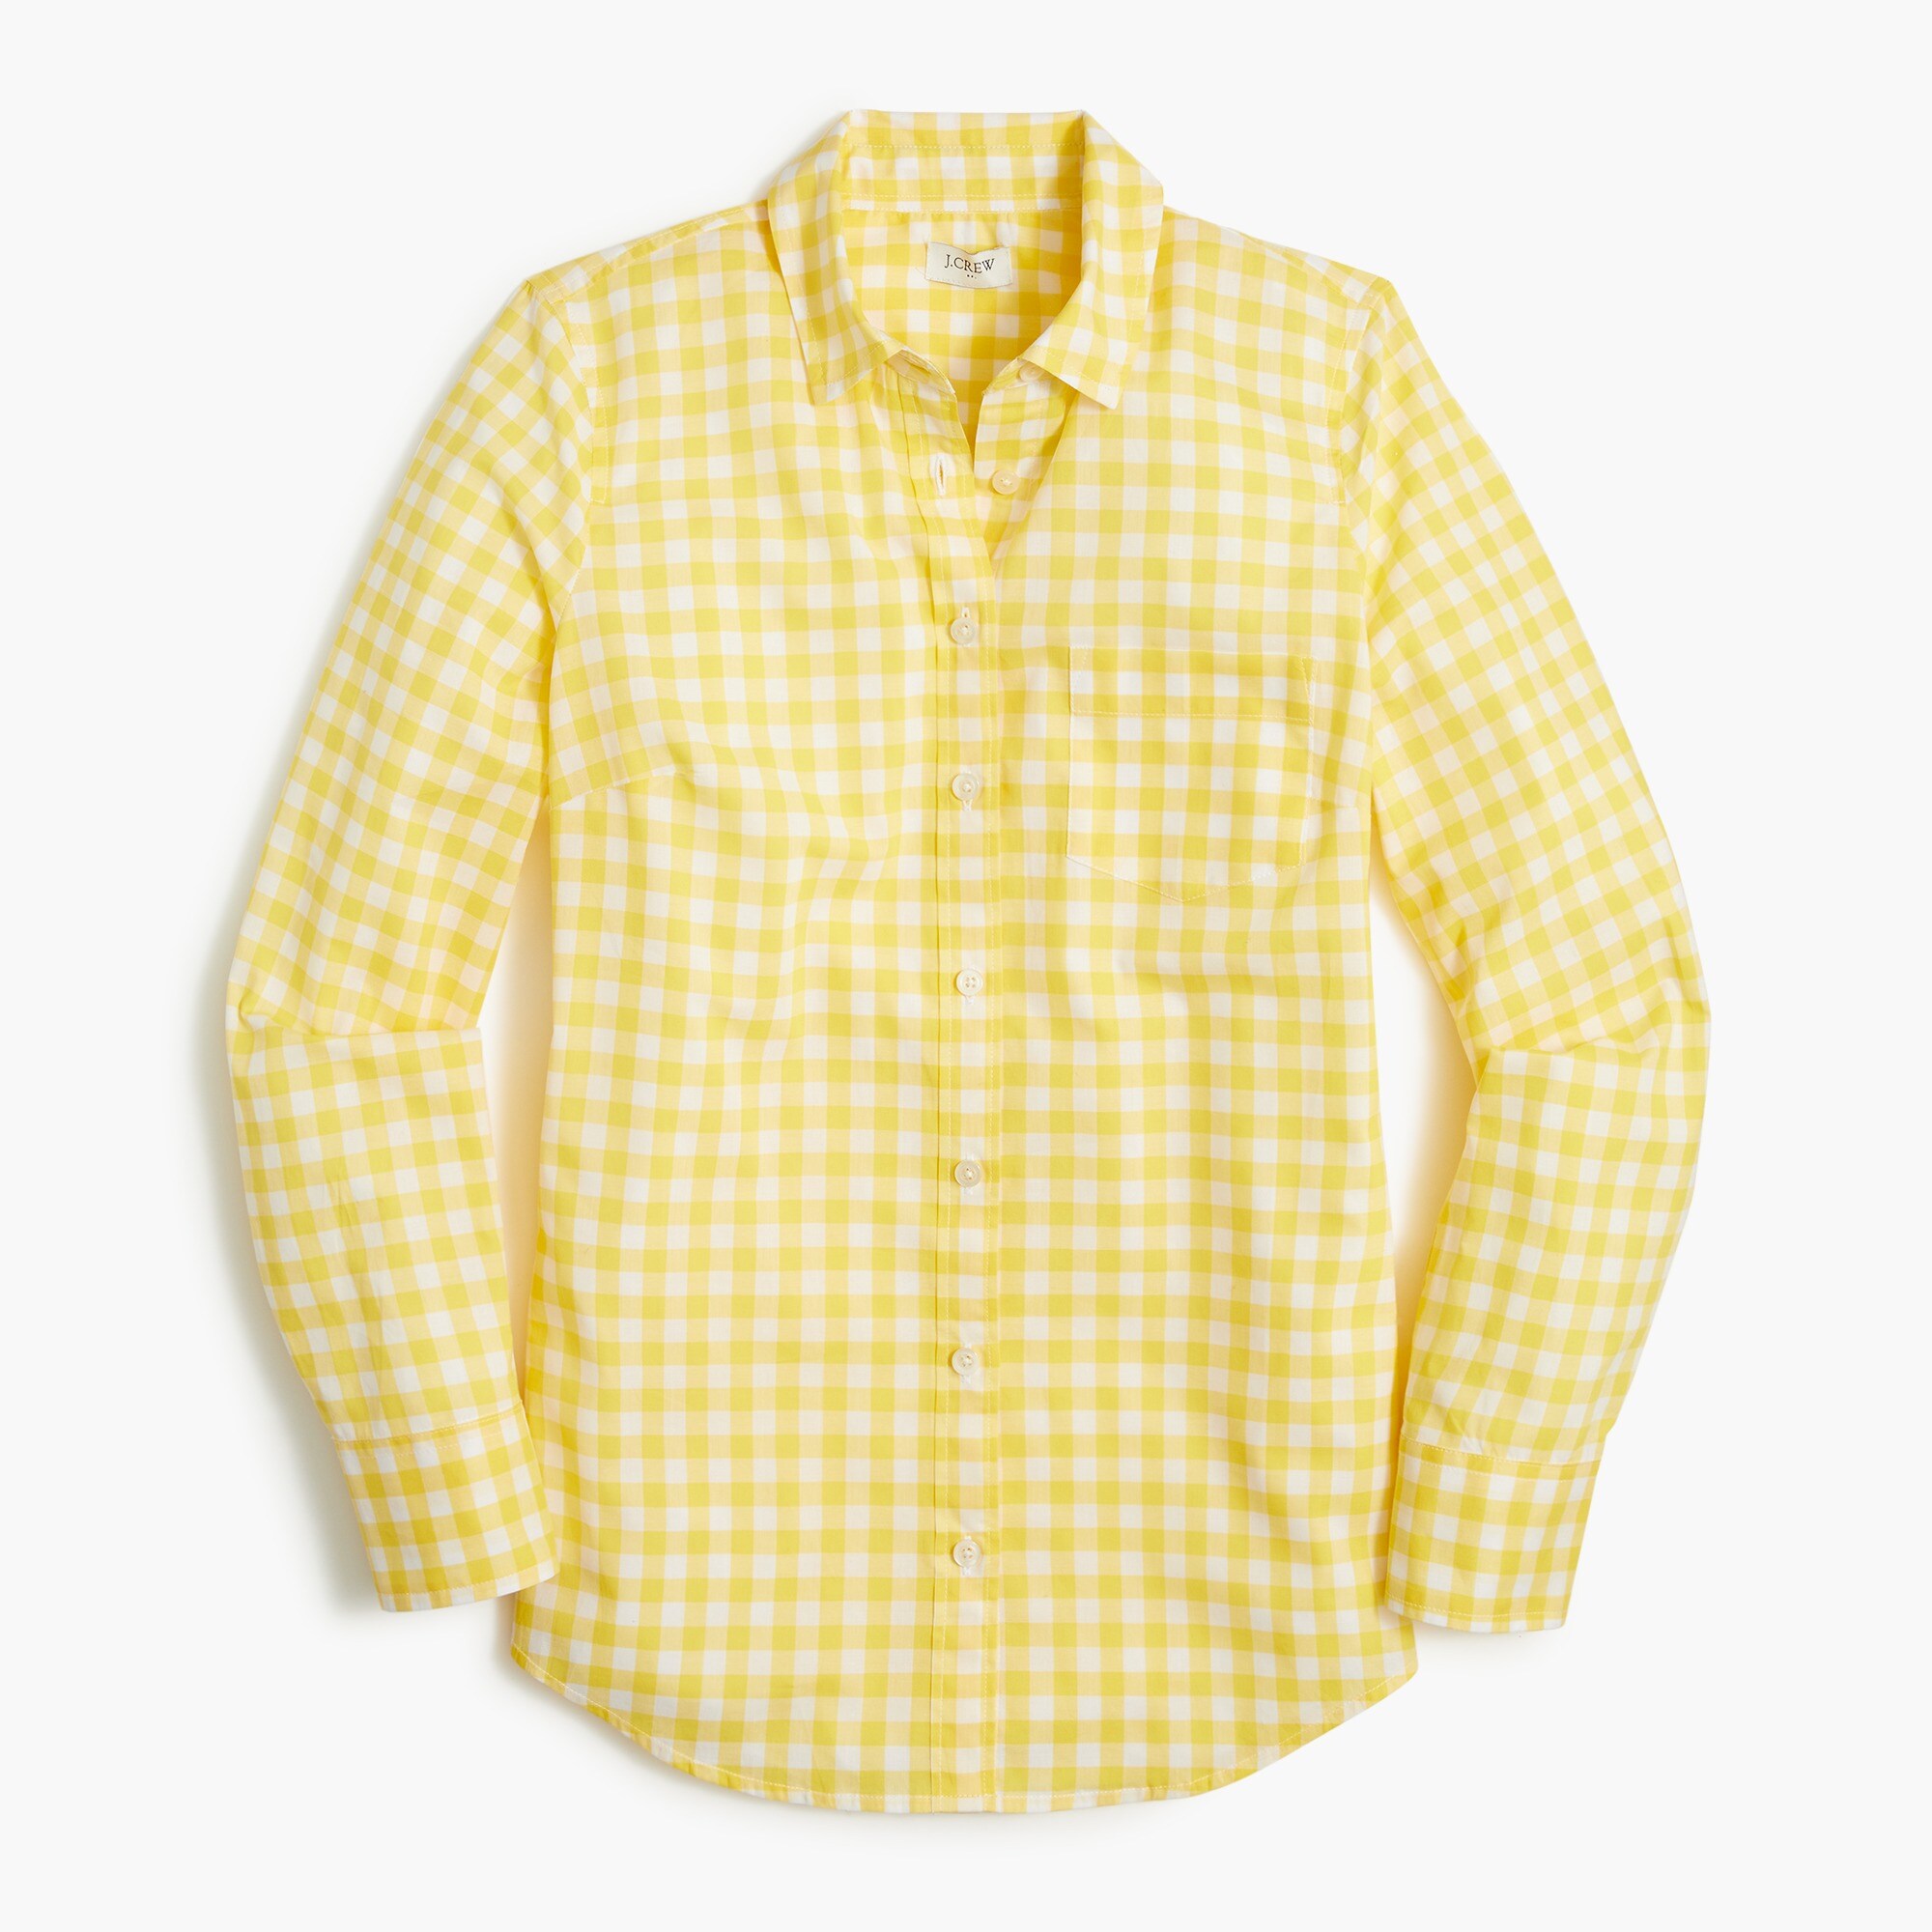  Gingham lightweight cotton shirt in signature fit